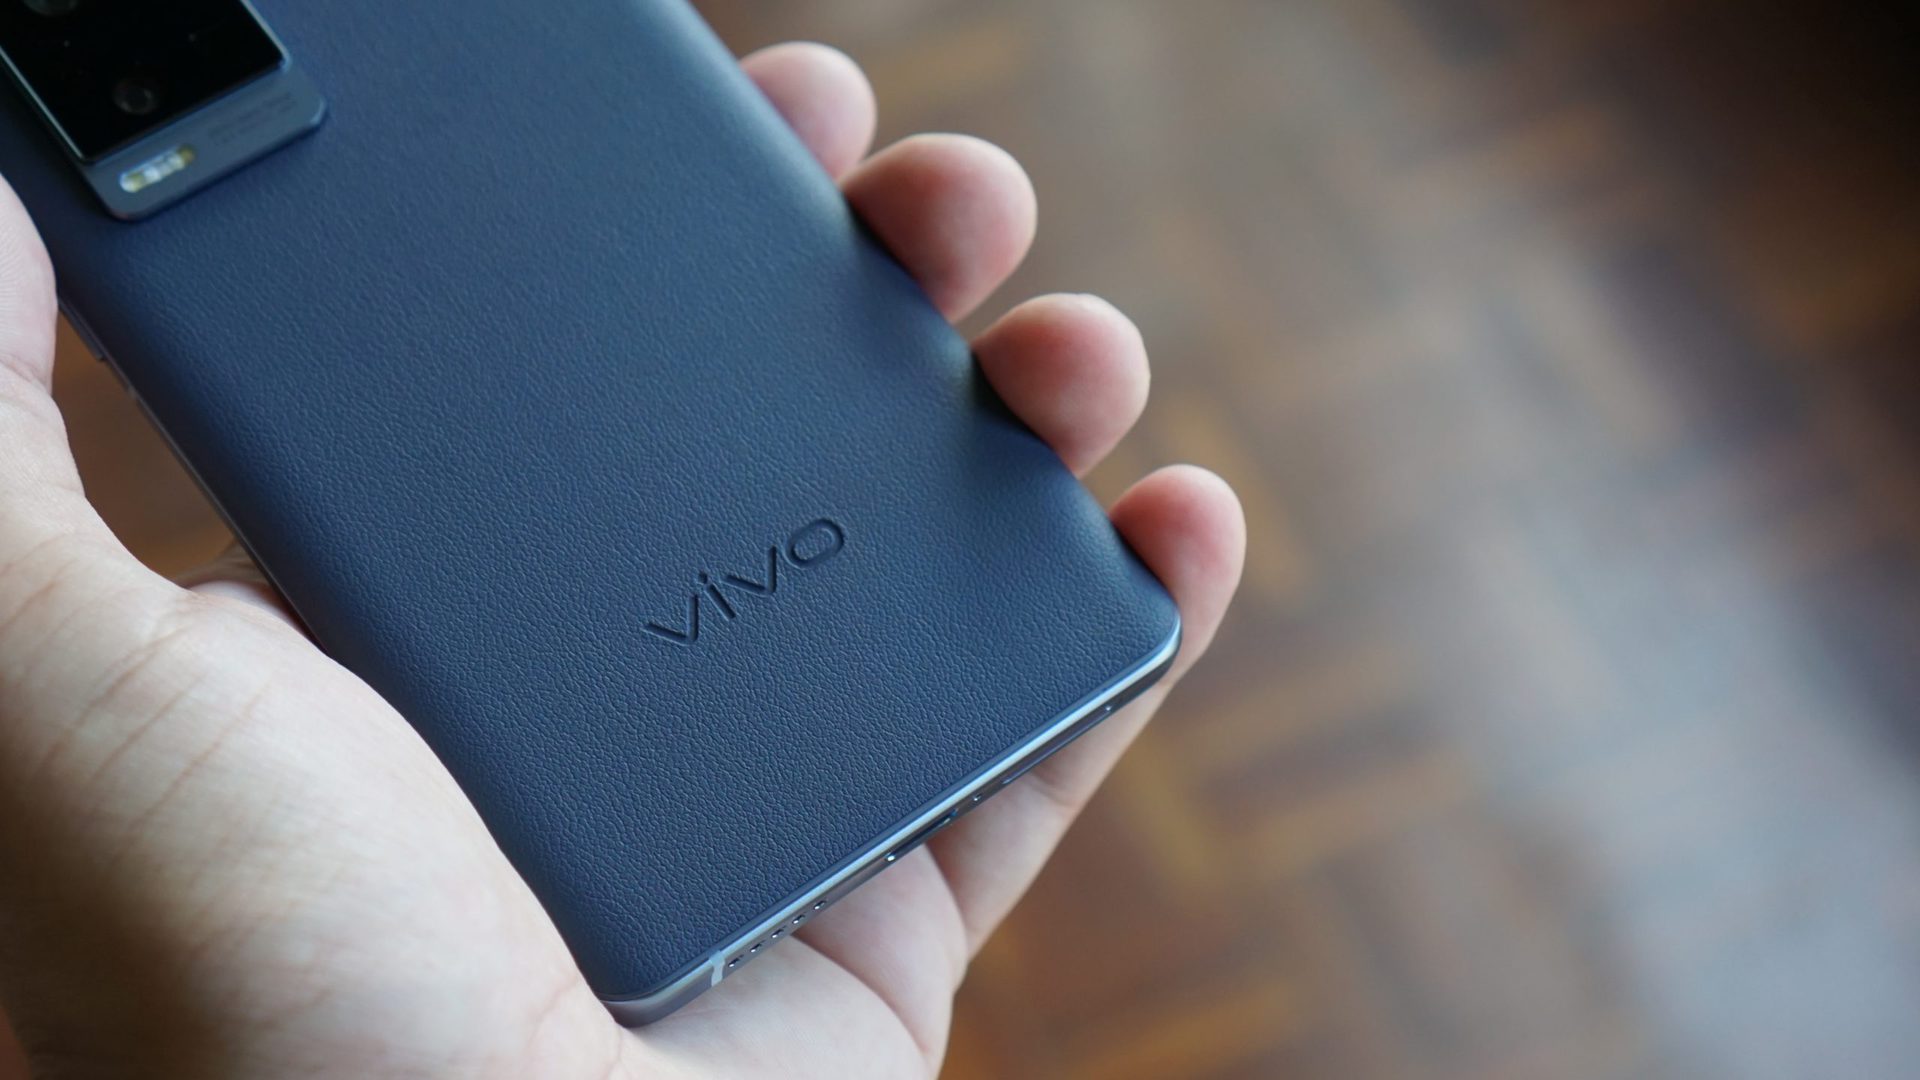 Vivo X60 Pro Plus in hand showing the rear of phone and logo